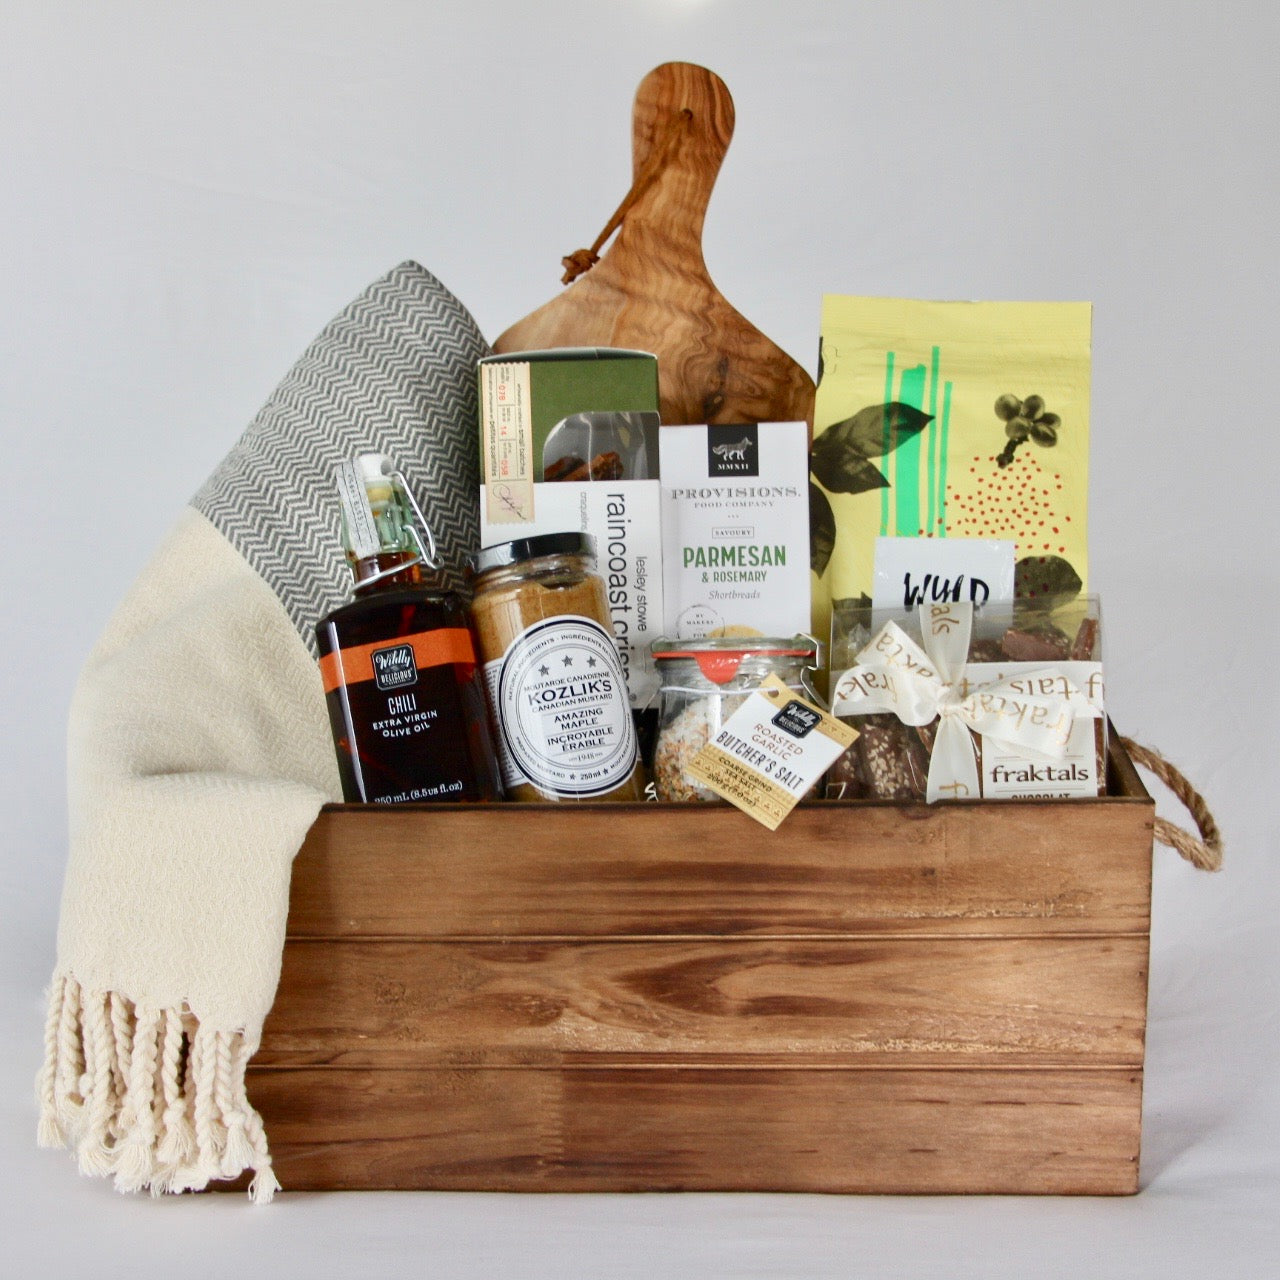 This sophisticated housewarming gift box is filled with top quality organic and wholesome products that are practical and will help them settle into their home with a little bit more ease. It also includes a hand-loomed organic Turkish cotton towel, an olive wood board and a handy wooden storage bin with handles. Making it a perfect home closing gift for your client or housewarming gift for a loved one.